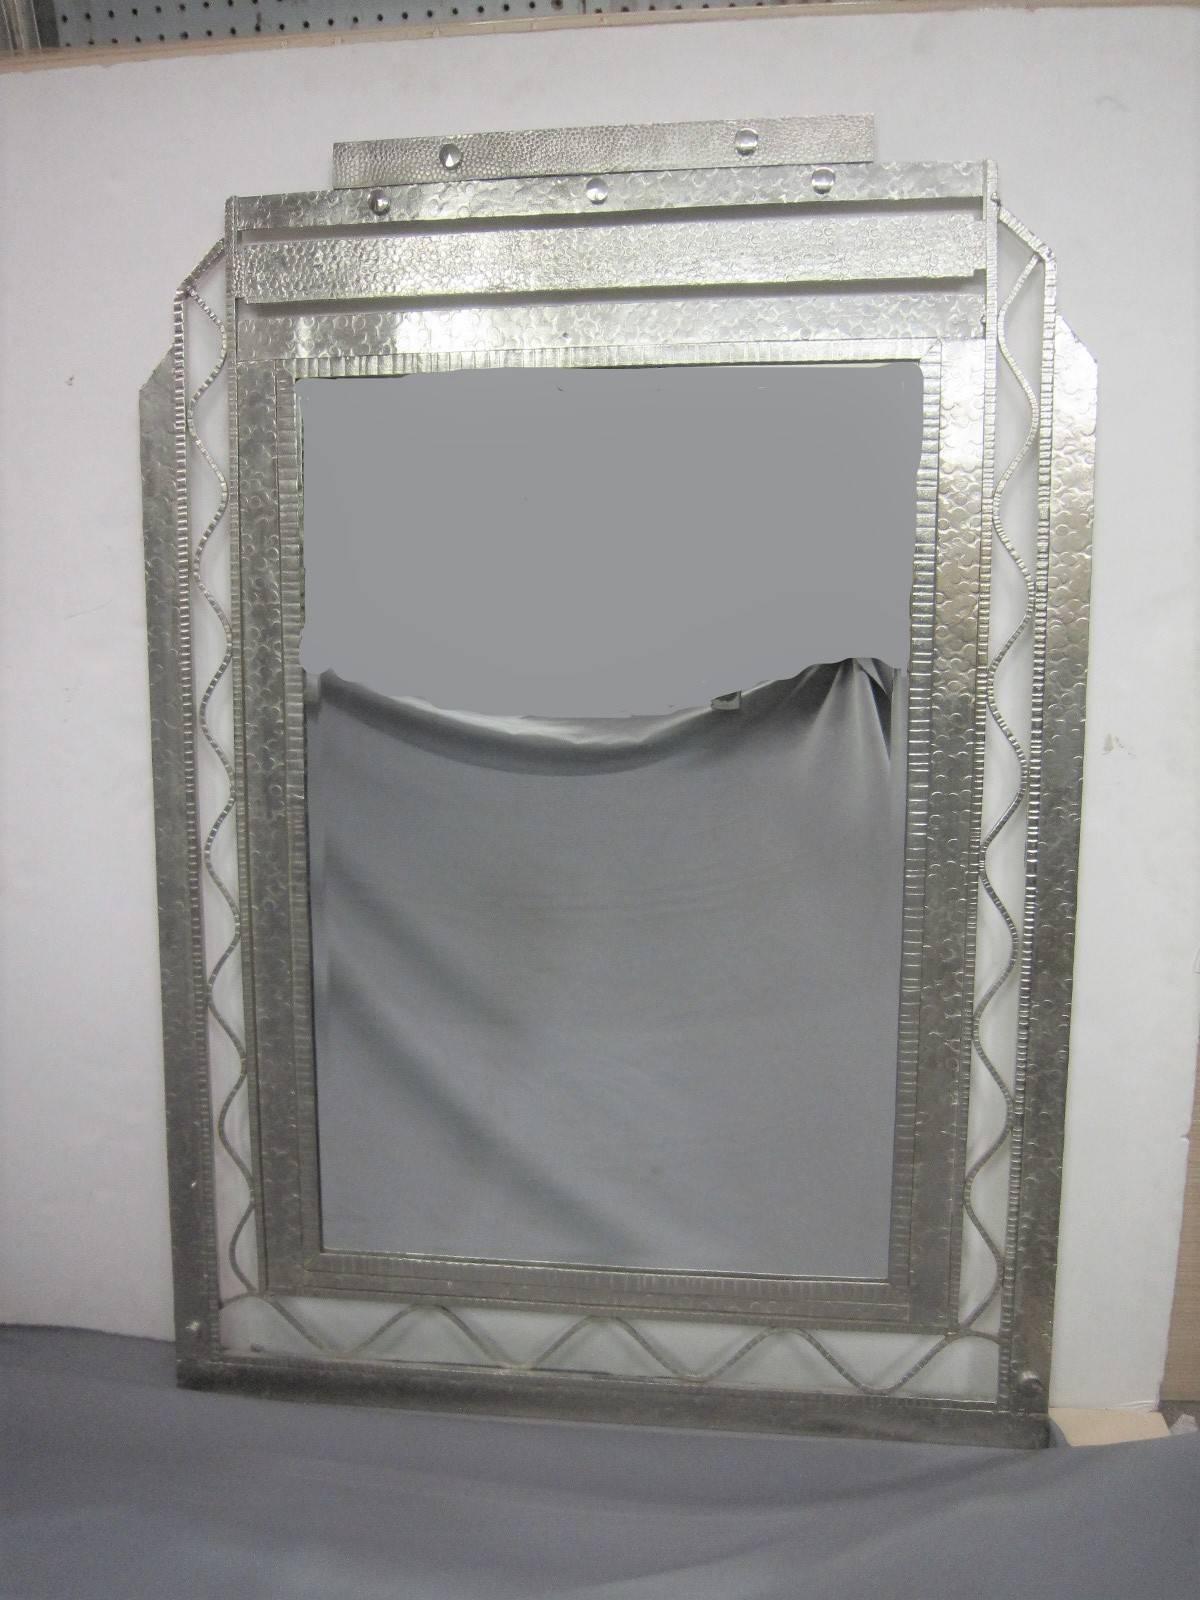 A very imposing and large, original French Art Deco hand-forged iron mirror.
This solid, hand-hammered iron rectangular mirror features a full decorative surround. The top, of stepped design is flanked by stepped sides with wave like vertical